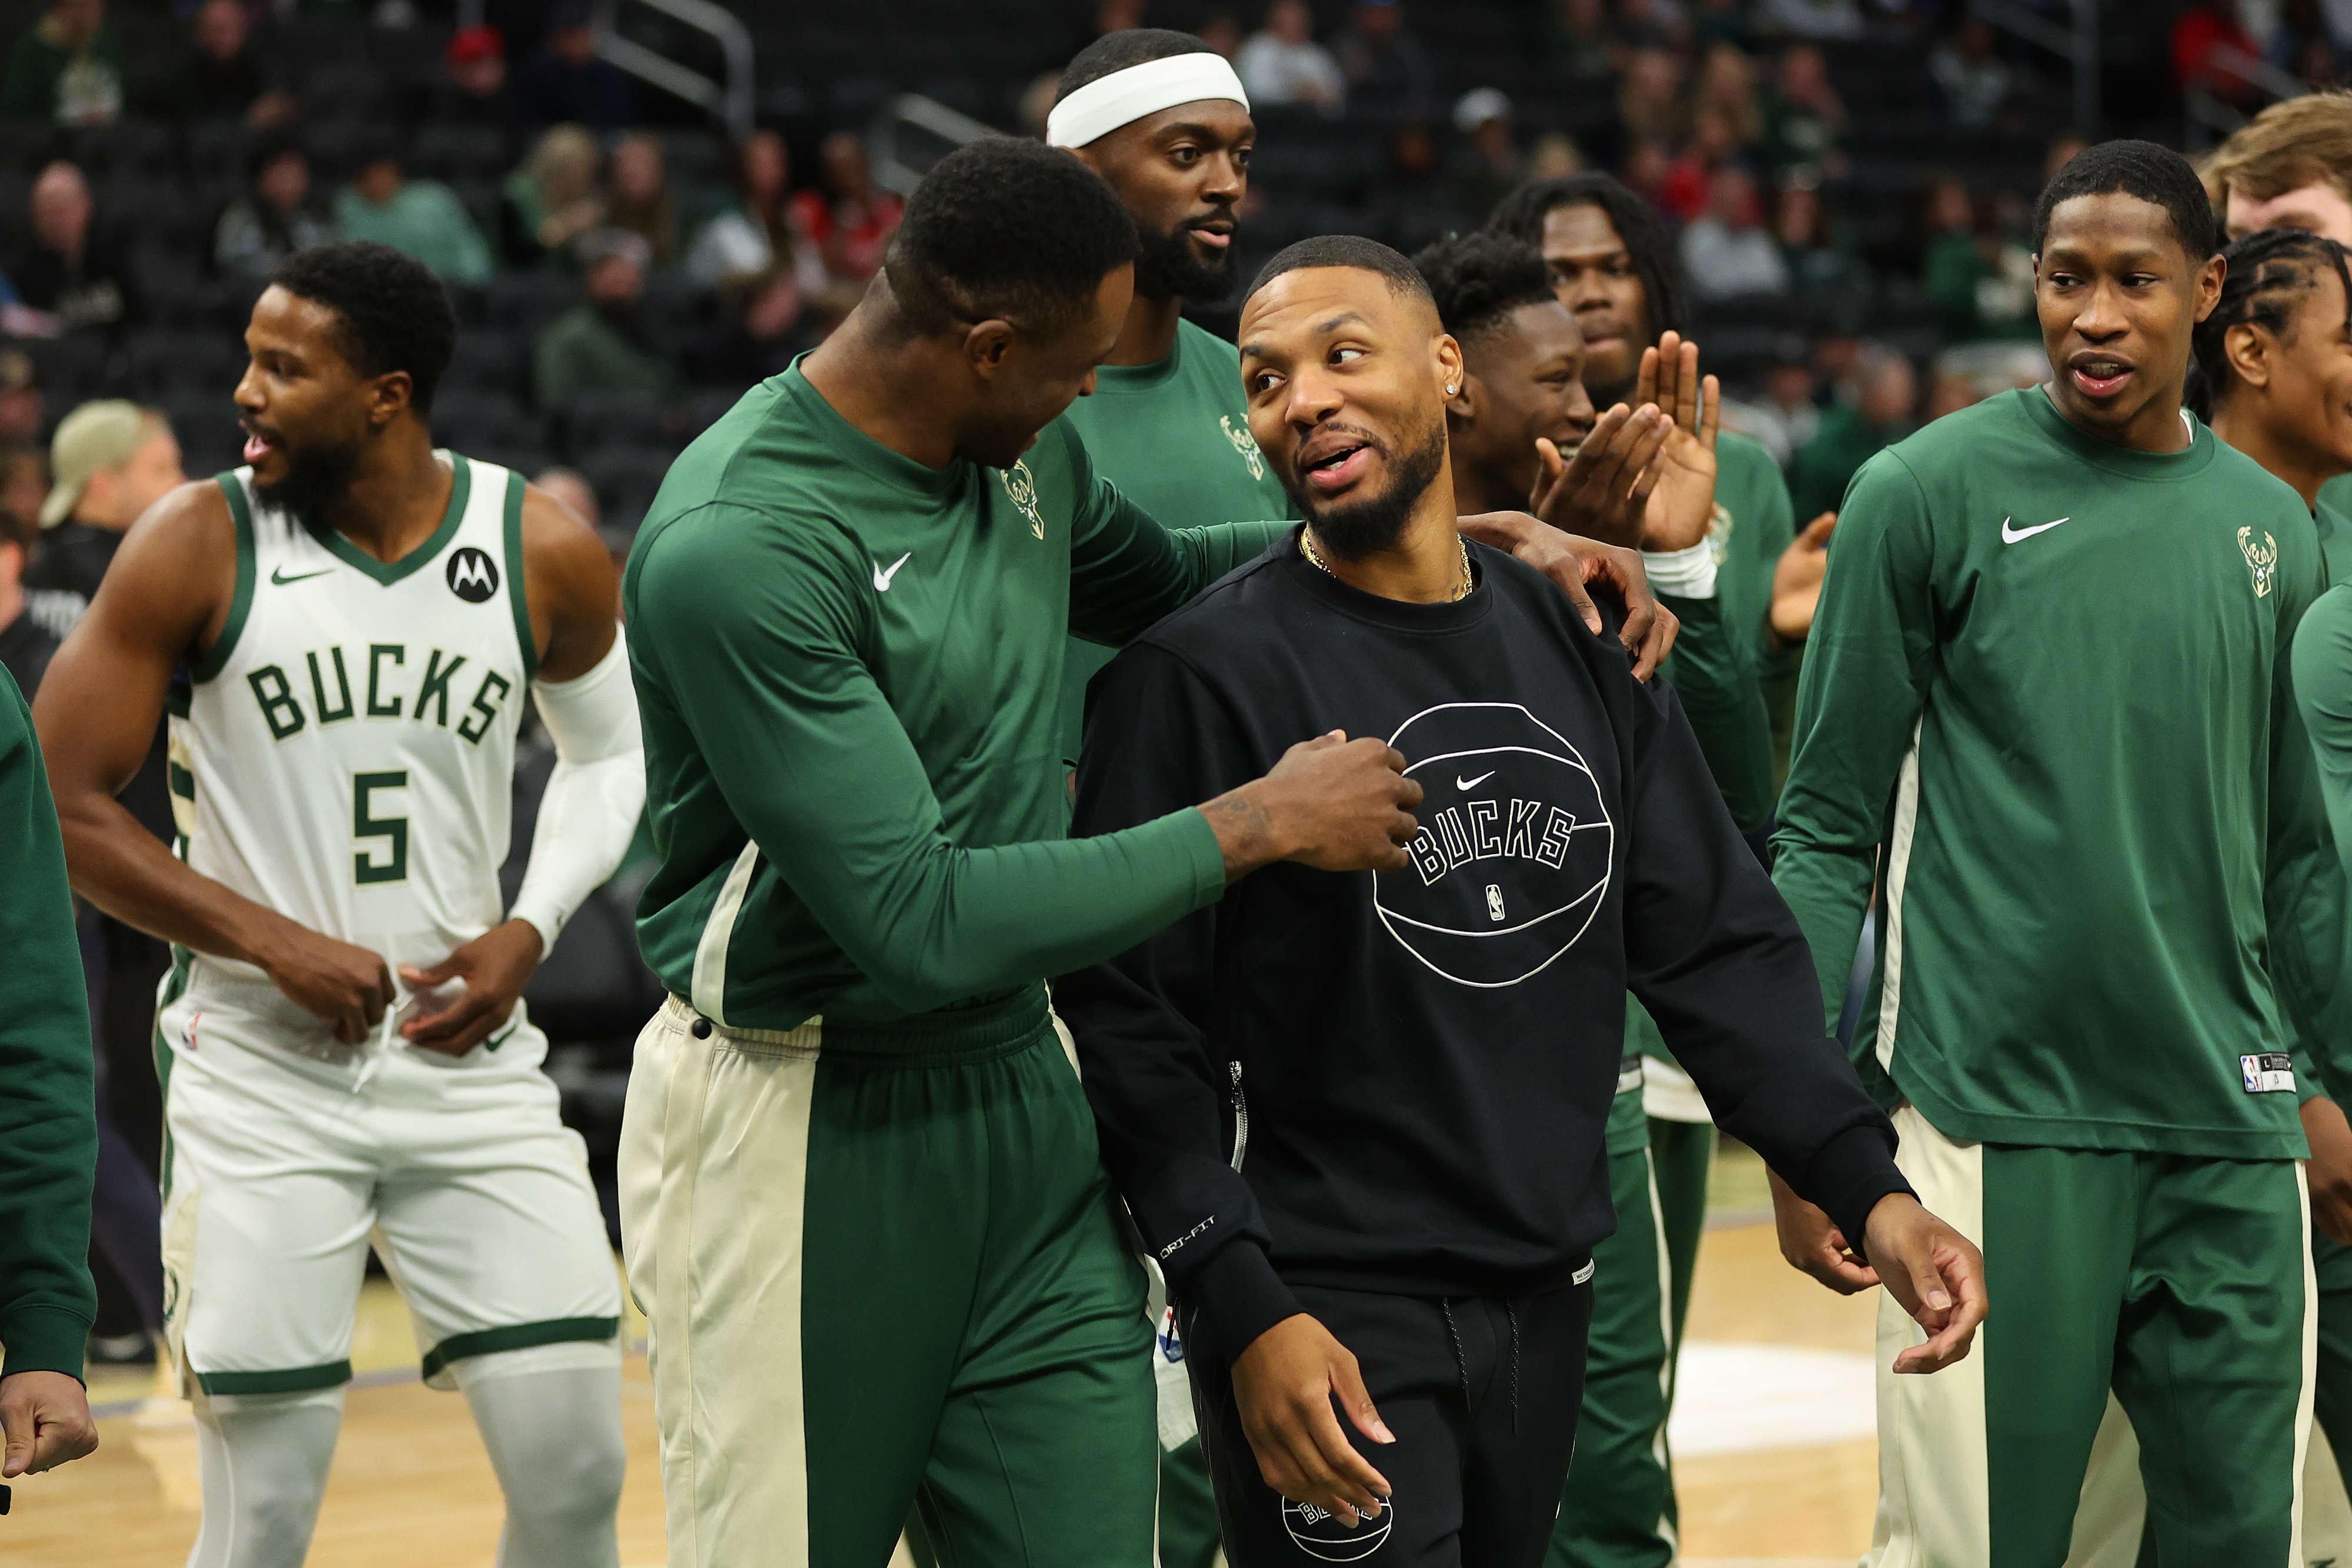 Milwaukee Bucks players sharing a light moment on the court pre-game